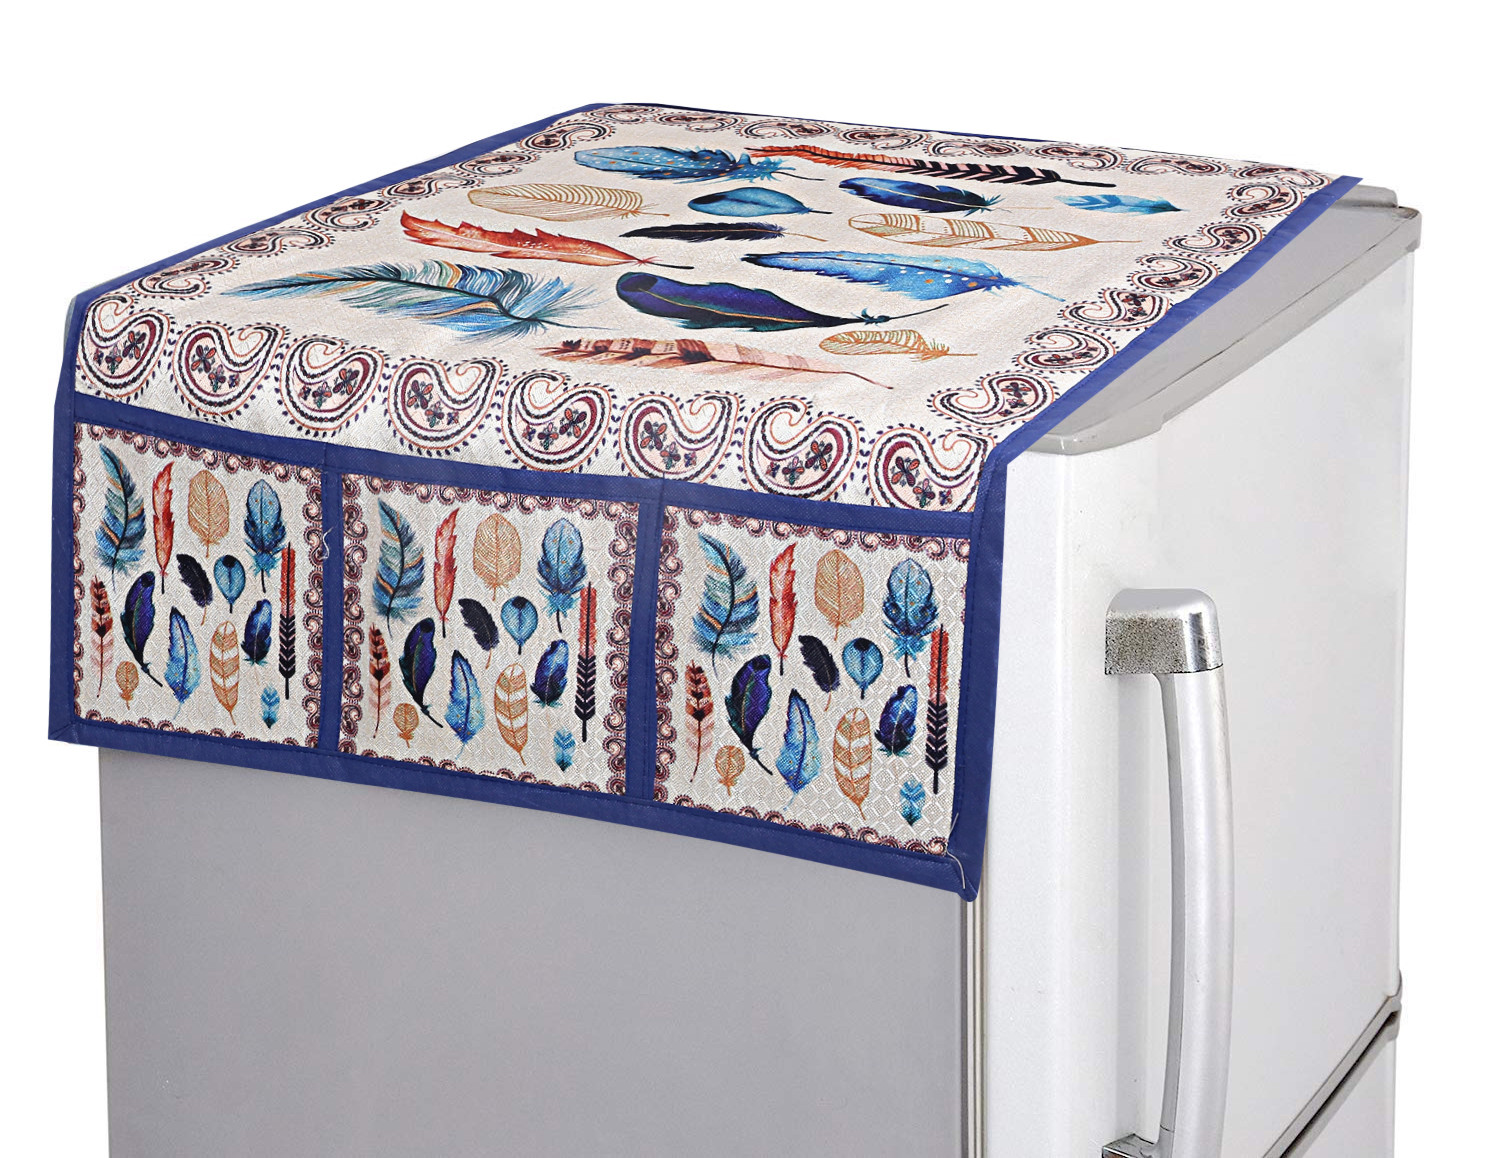 Kuber Industries Birds Wings Print Jute 3-Layered Fridge/Refrigerator Top Cover with 6 Utility Pockets,Gold